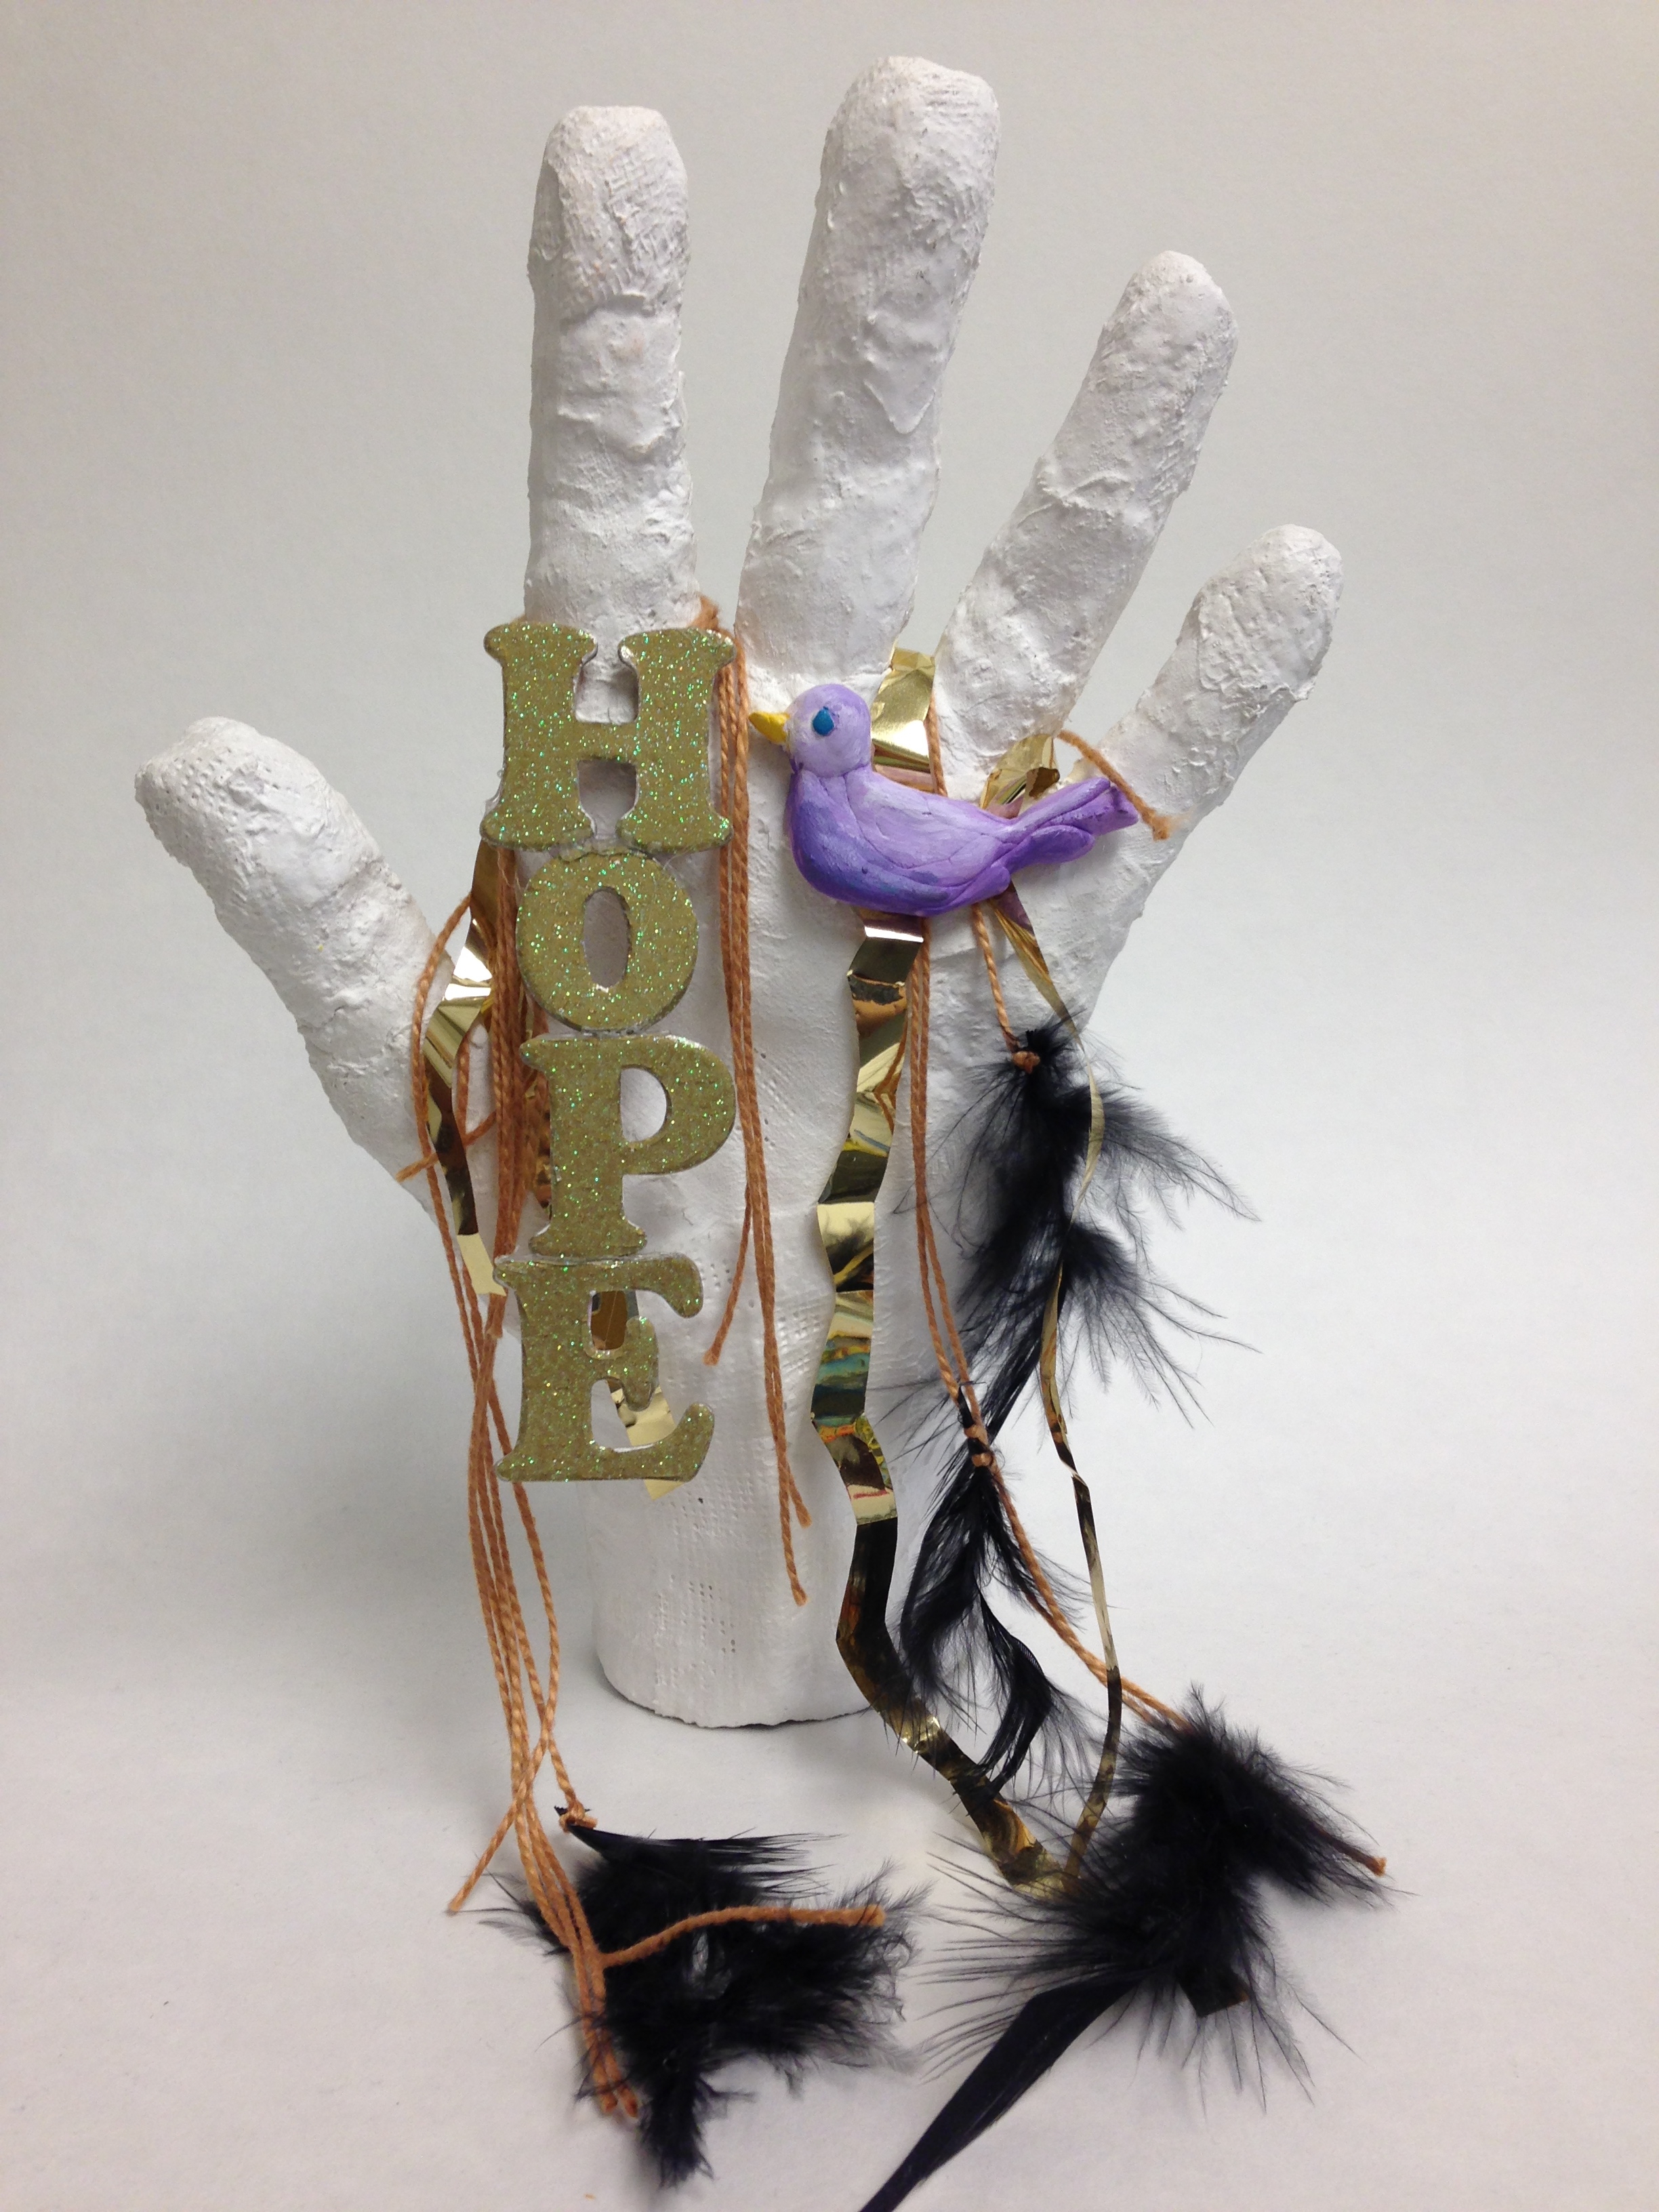 Plaster cast of a hand holding a purple bird, black feathers and the word "HOPE."